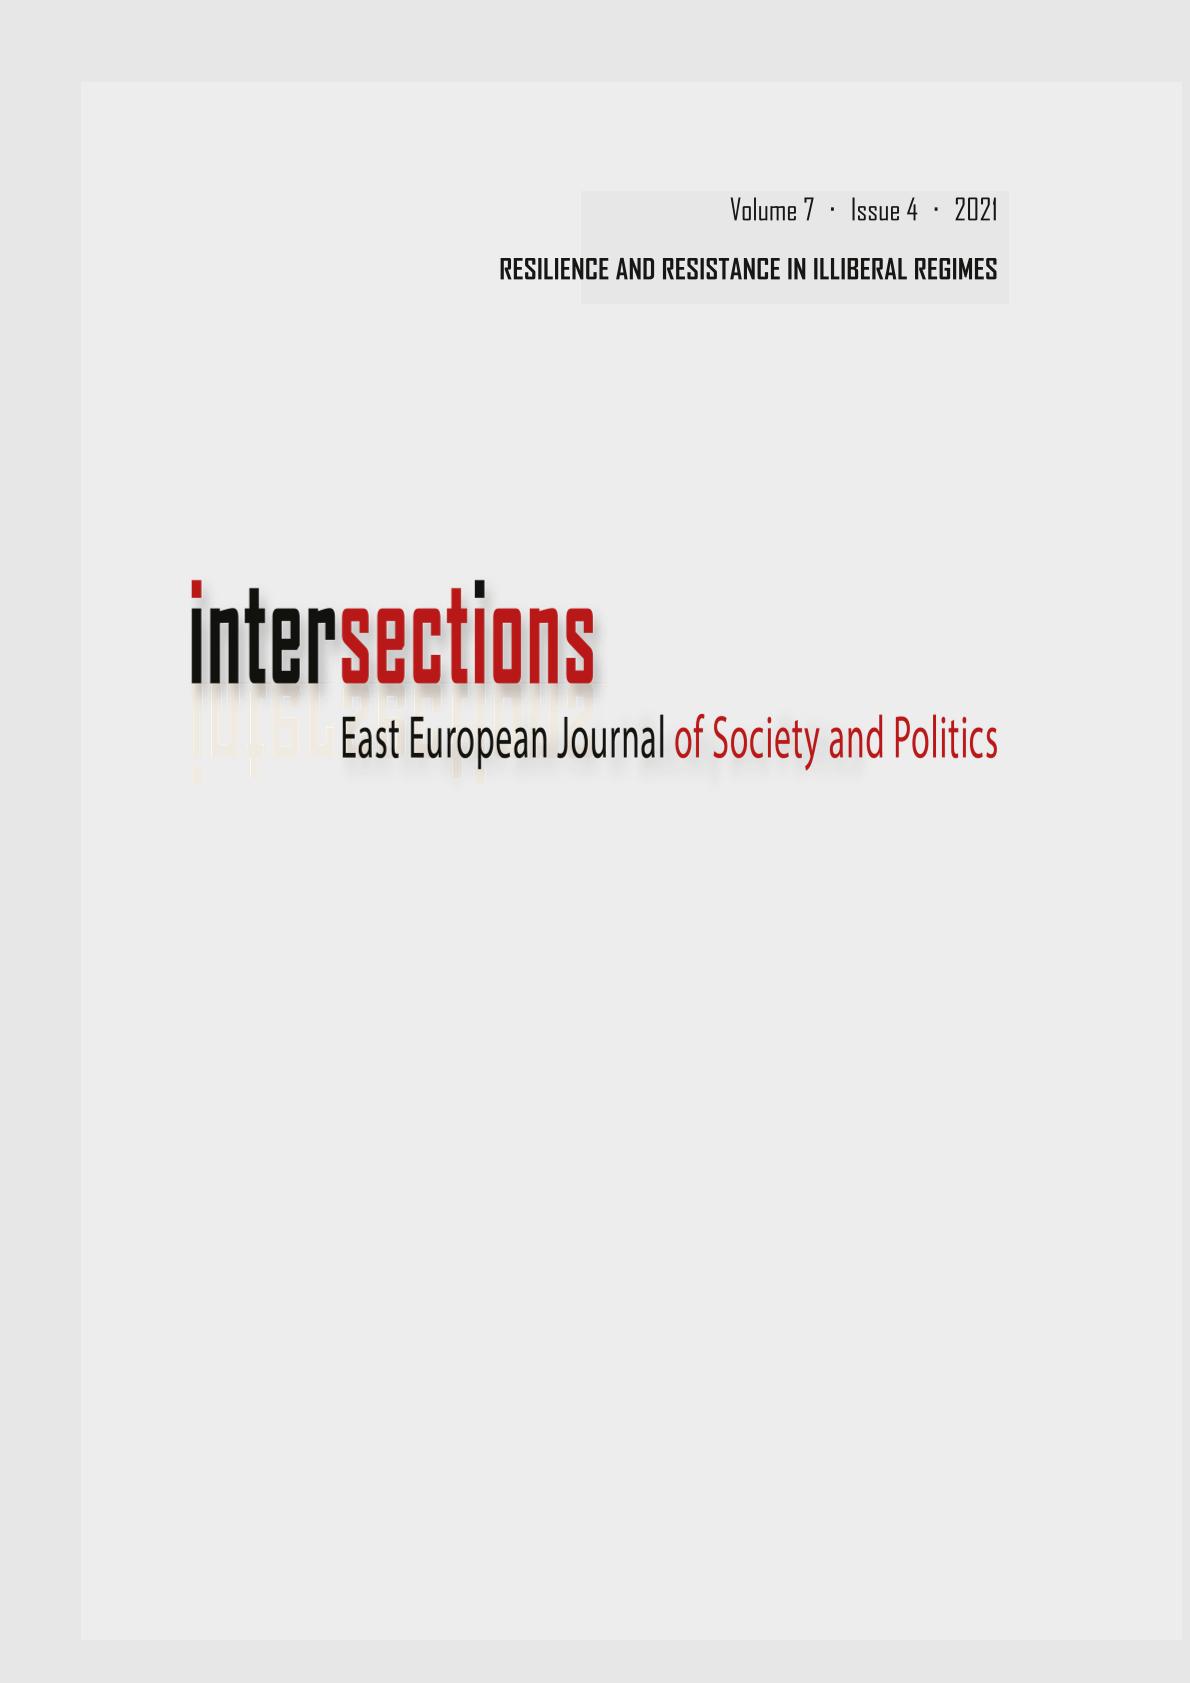 Society in the authoritarian discourse: The case of the 2020 presidential election in Belarus